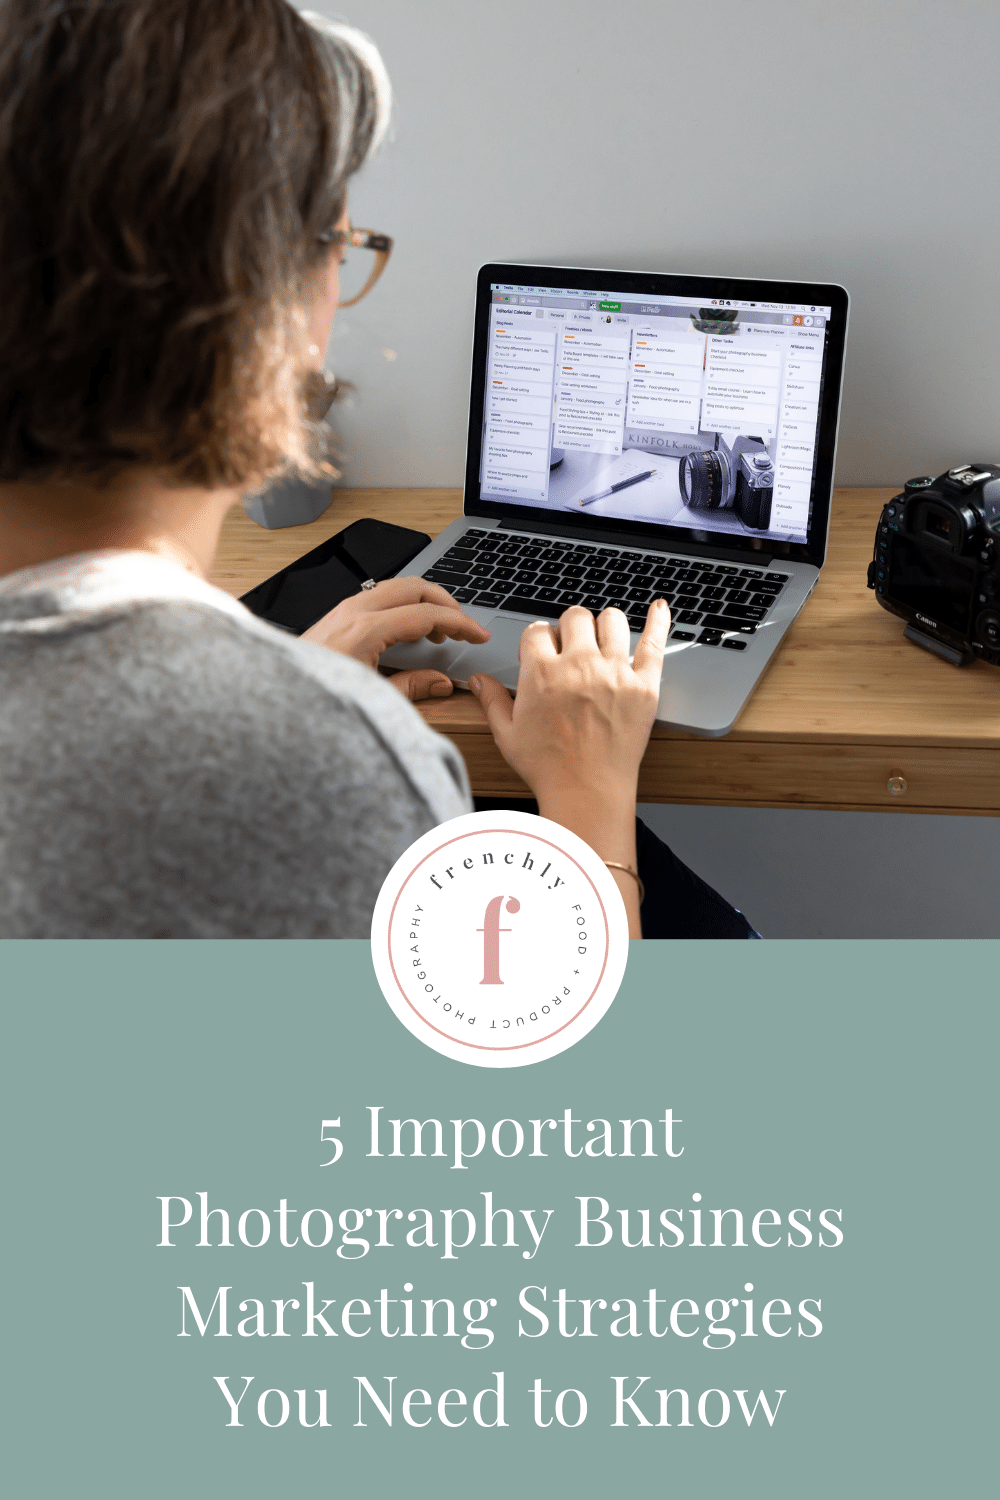 5 Important Photography Business Marketing Strategies You Need to Know | Frenchly Food + Product Photography